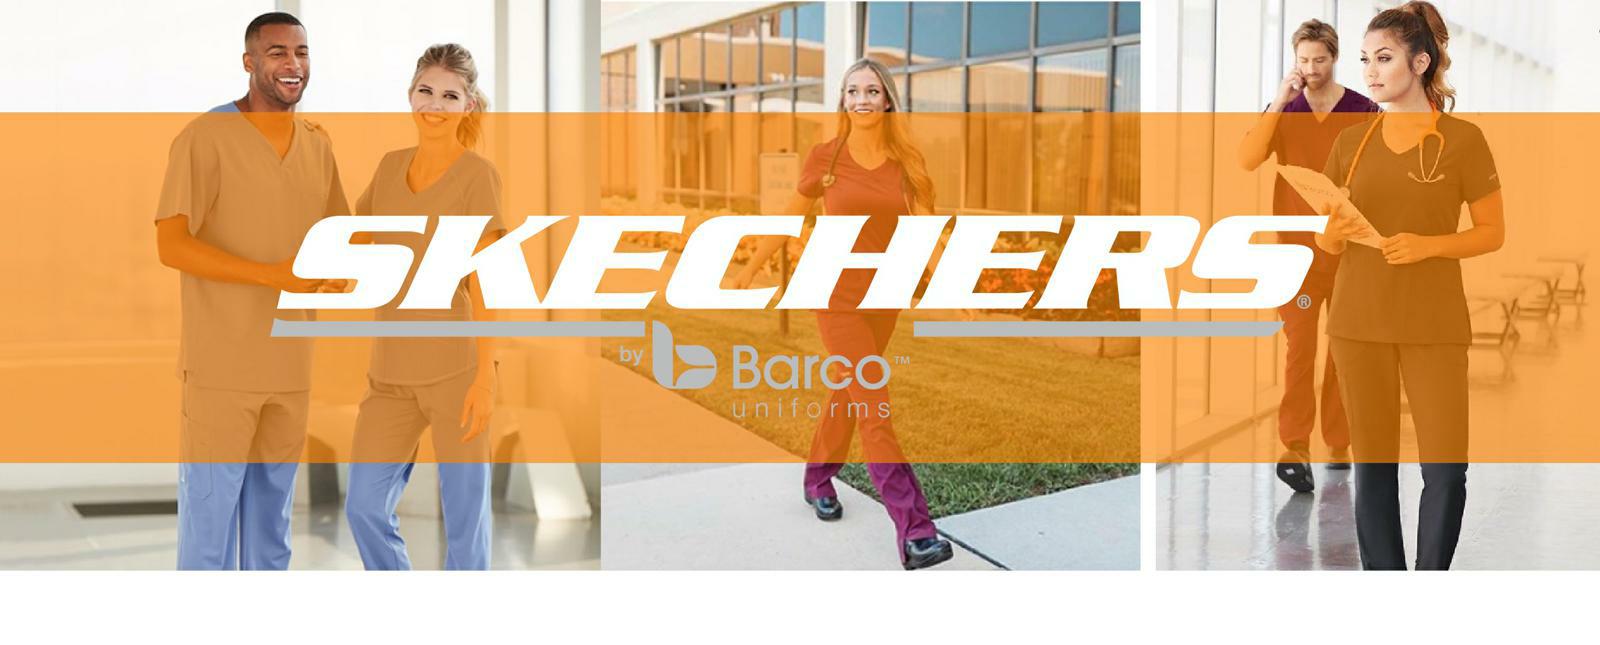 Crazy Scrubs on X: We love the new Skechers collection by Barco